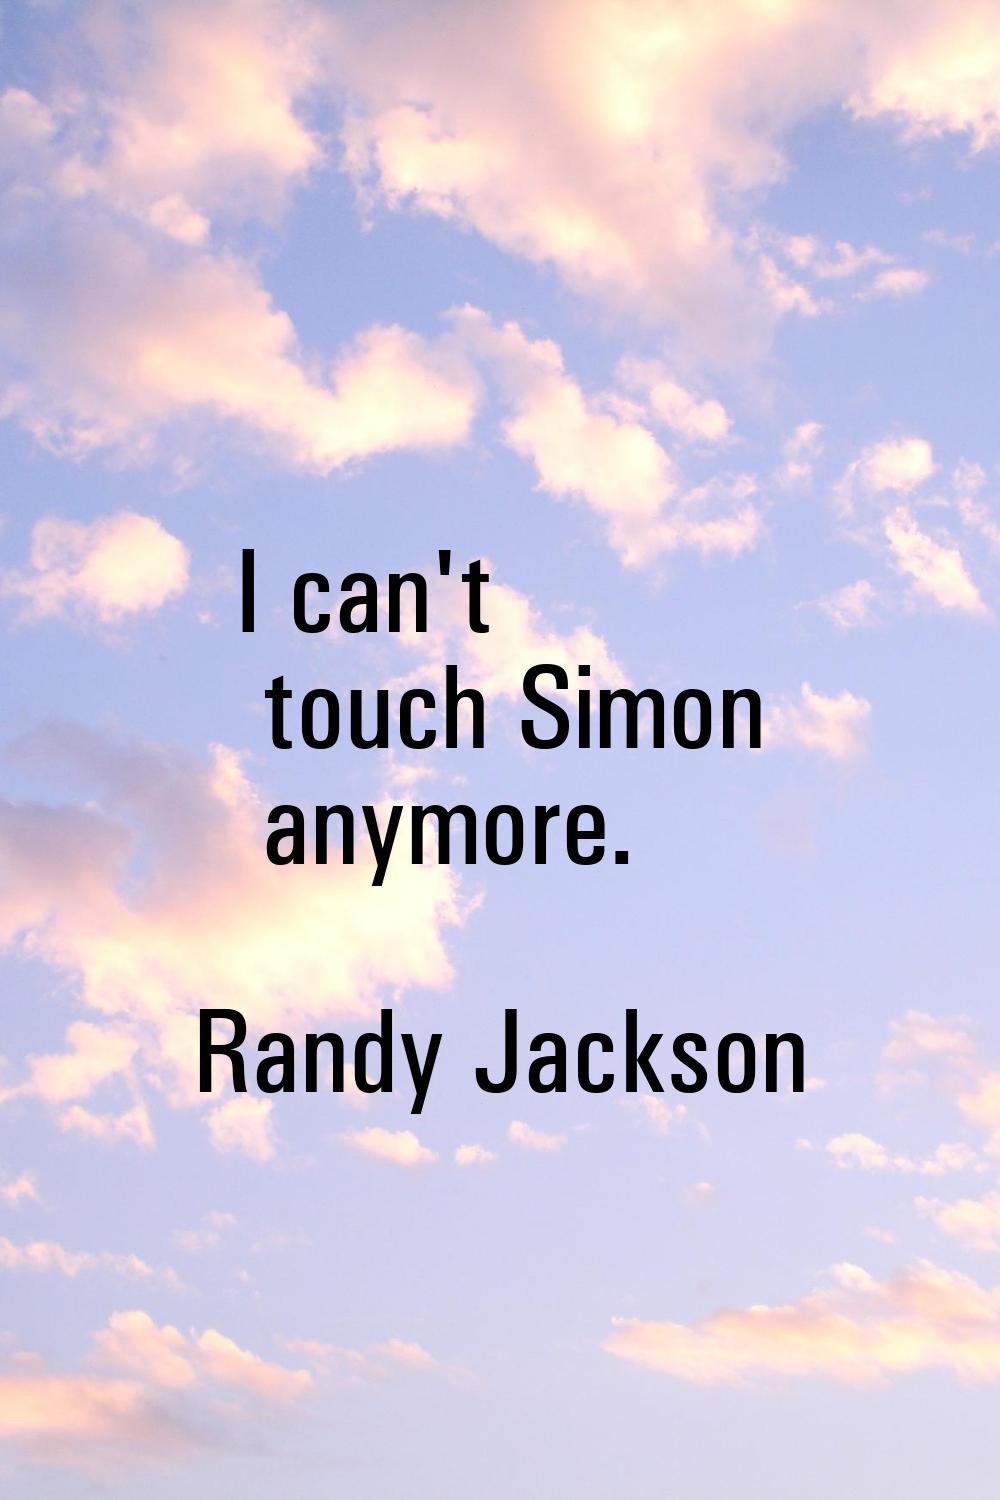 I can't touch Simon anymore.